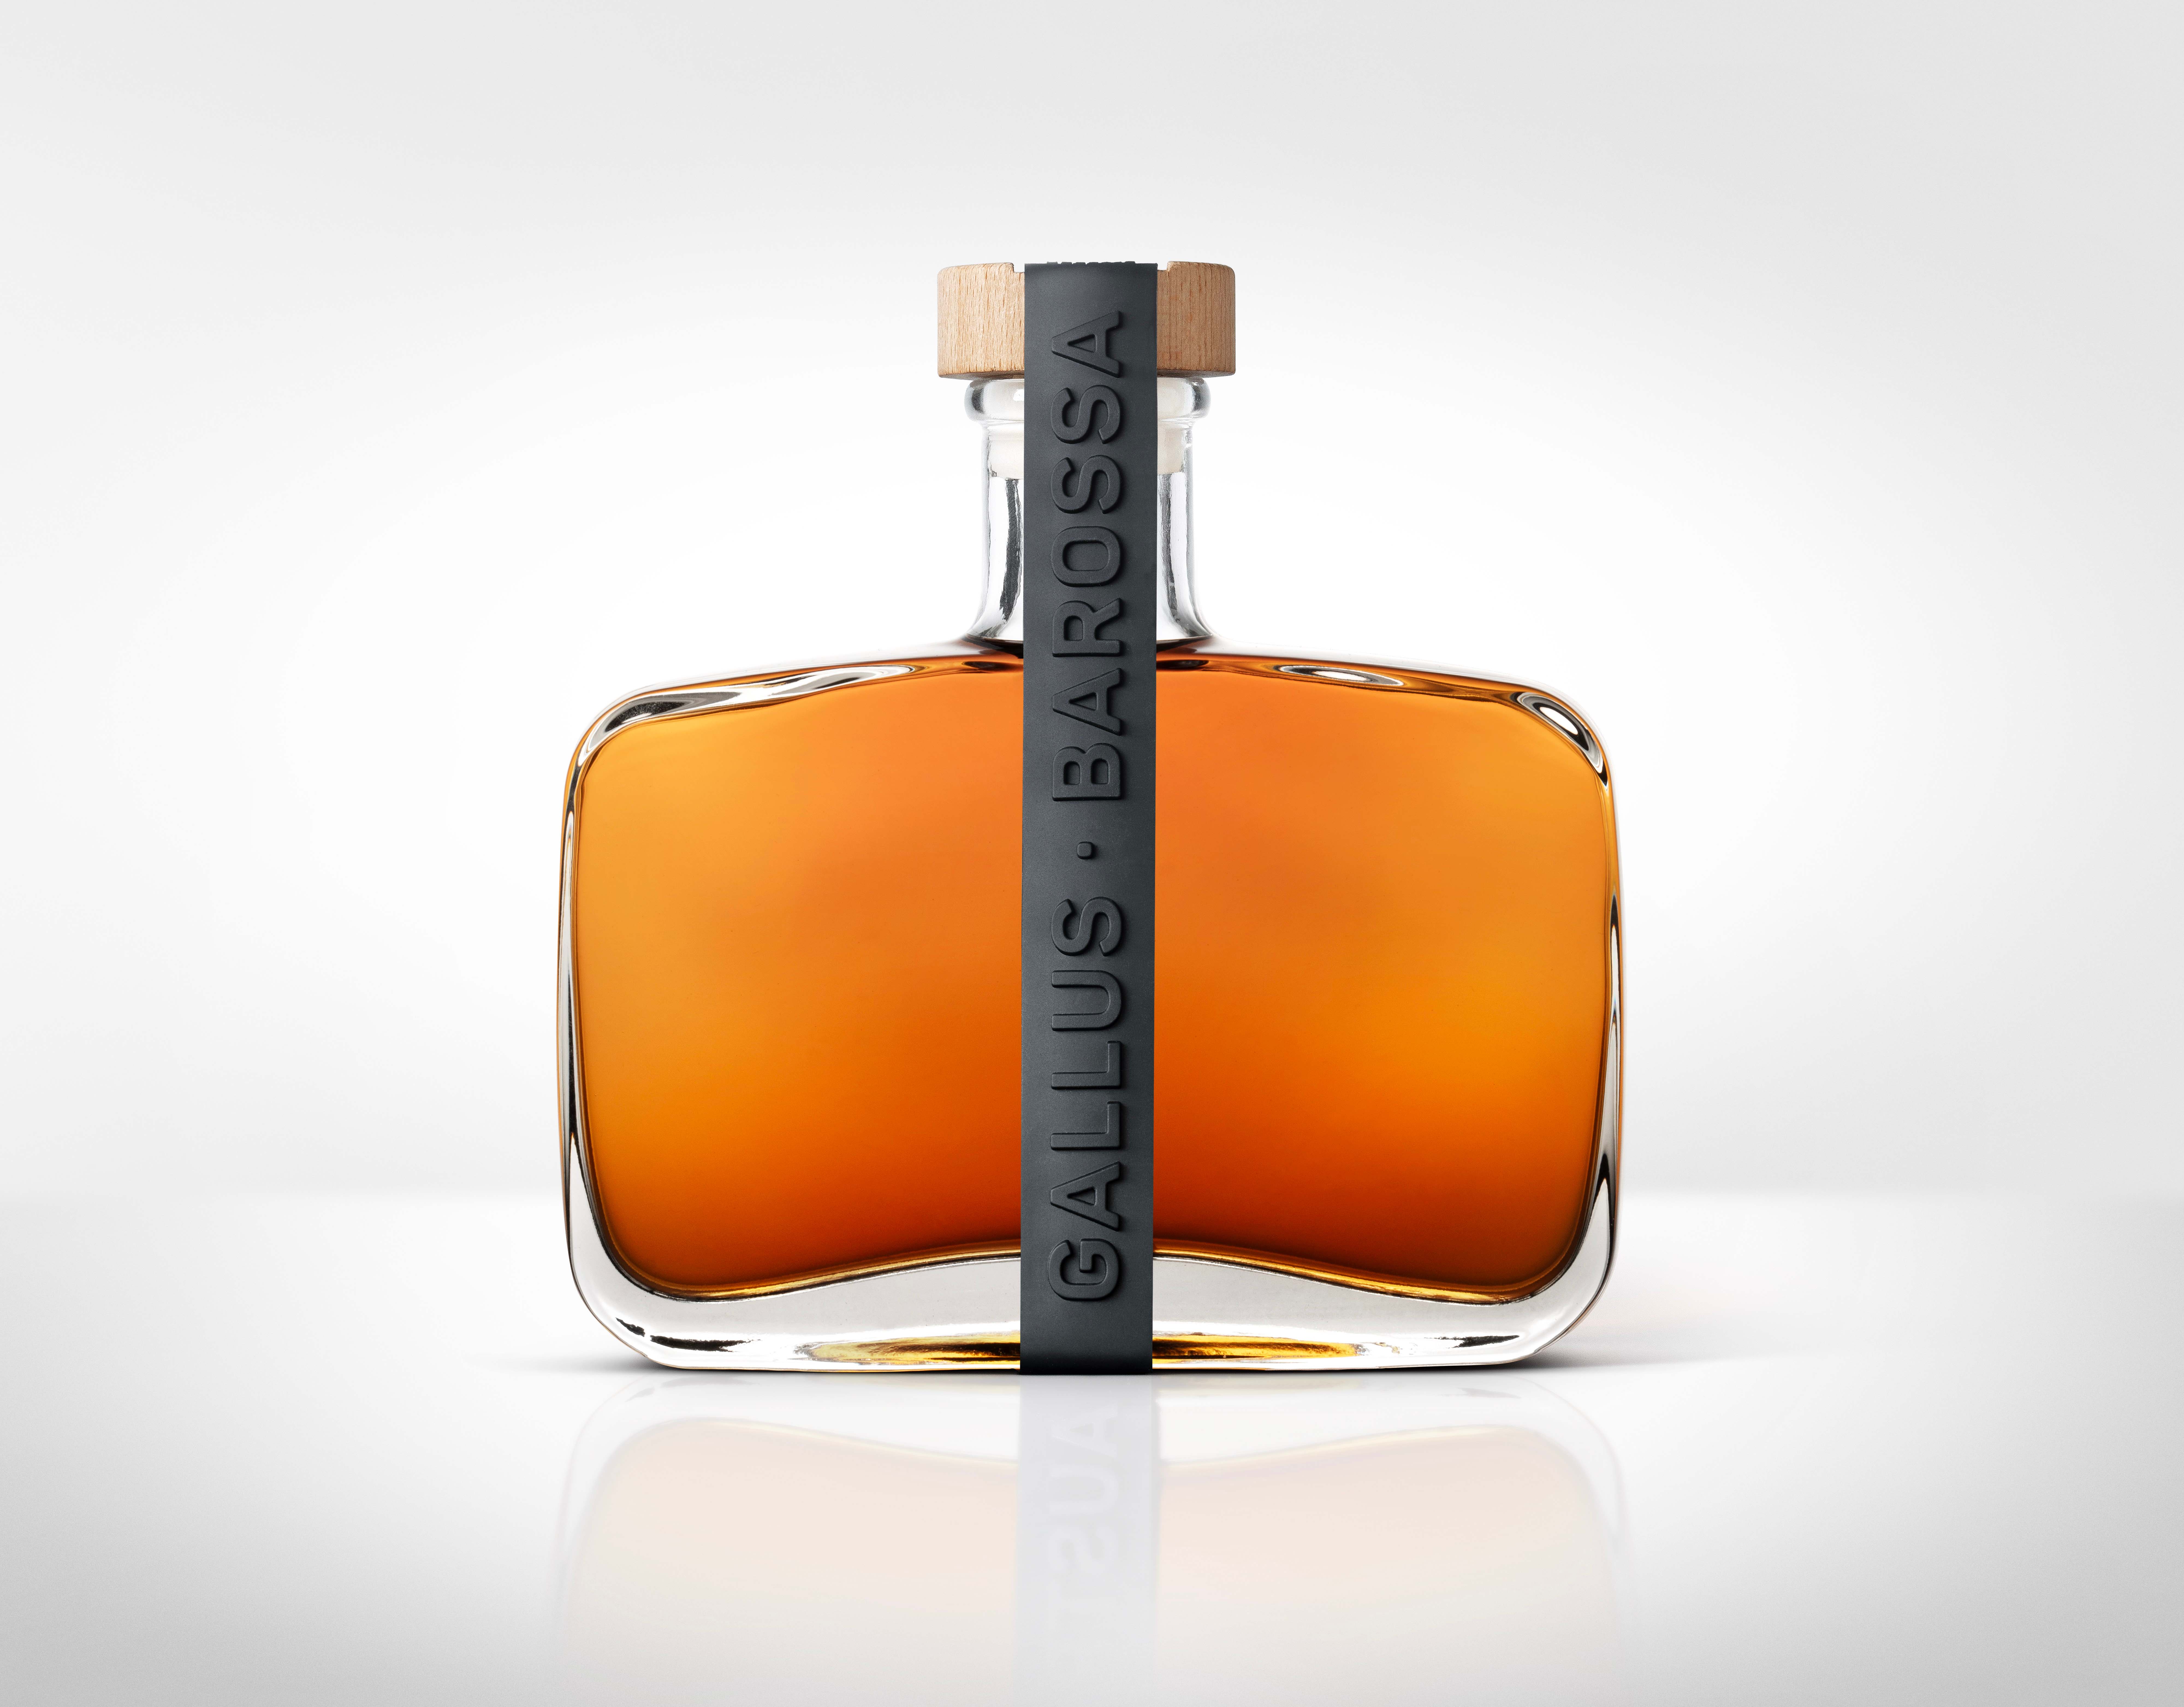 Gallus Shakes Up the World of Whisky With Bold Design From Denomination